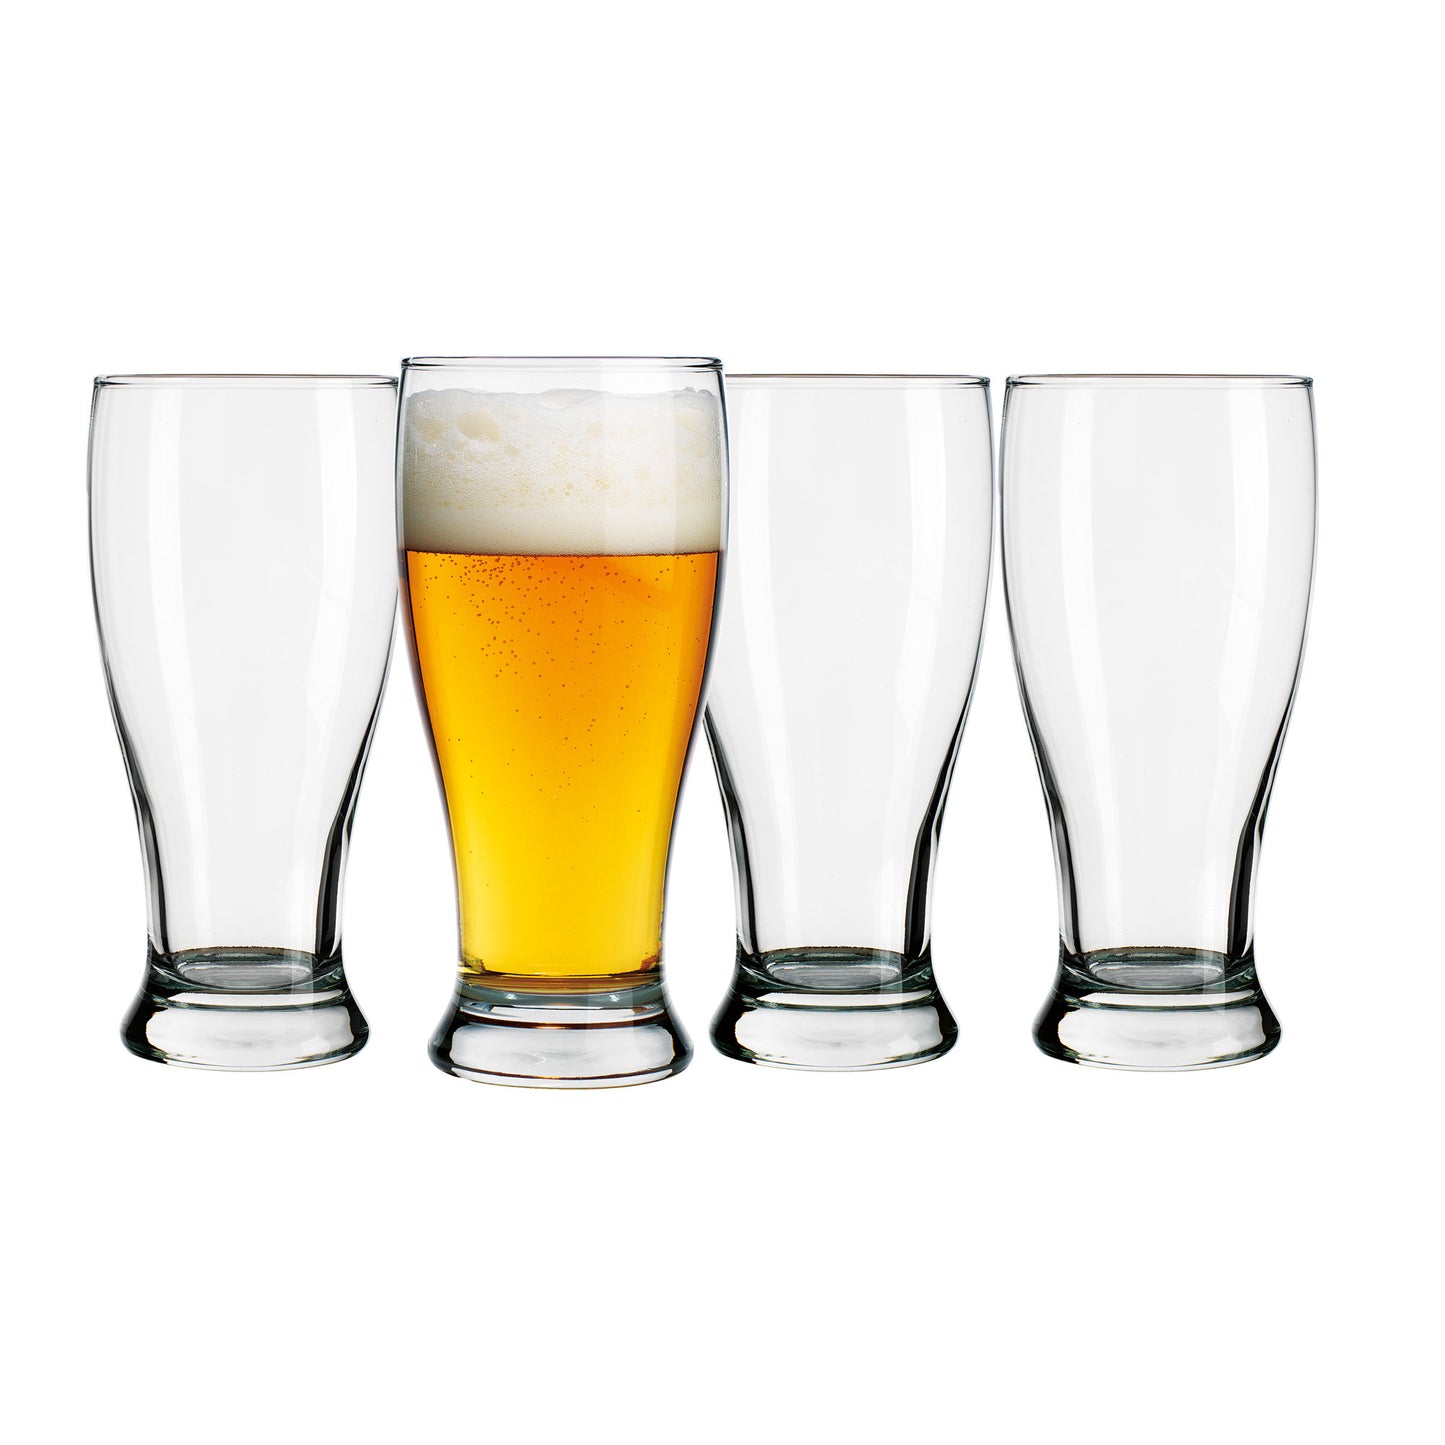 four pilsner glasses on filled with beer on a white background